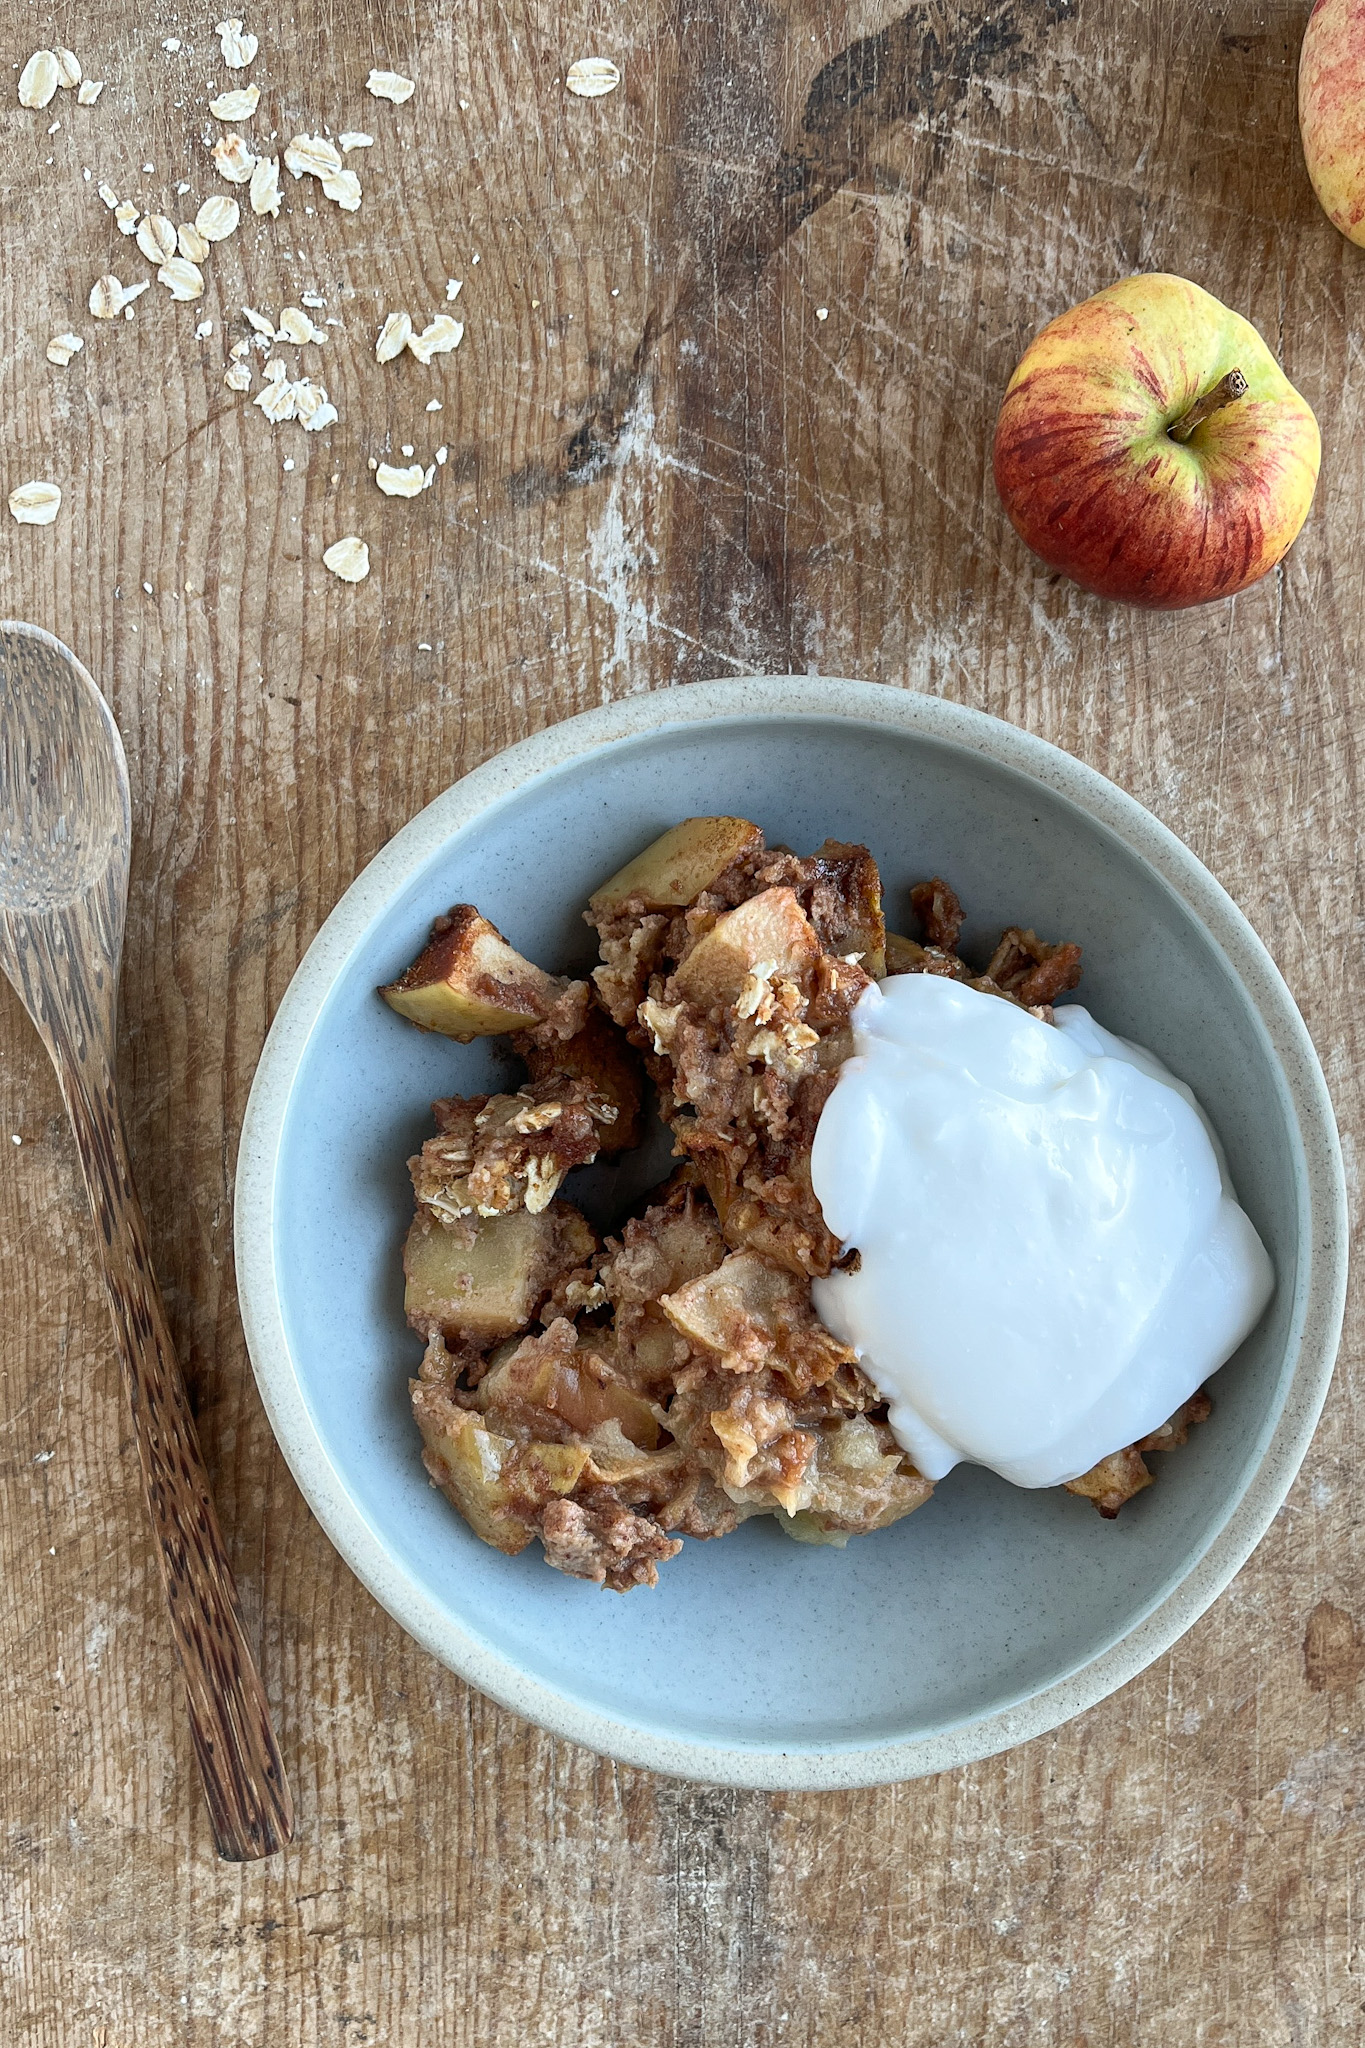 This easy-to-make apple crumble recipe is a seasonal start combining deliciousness and health benefits.